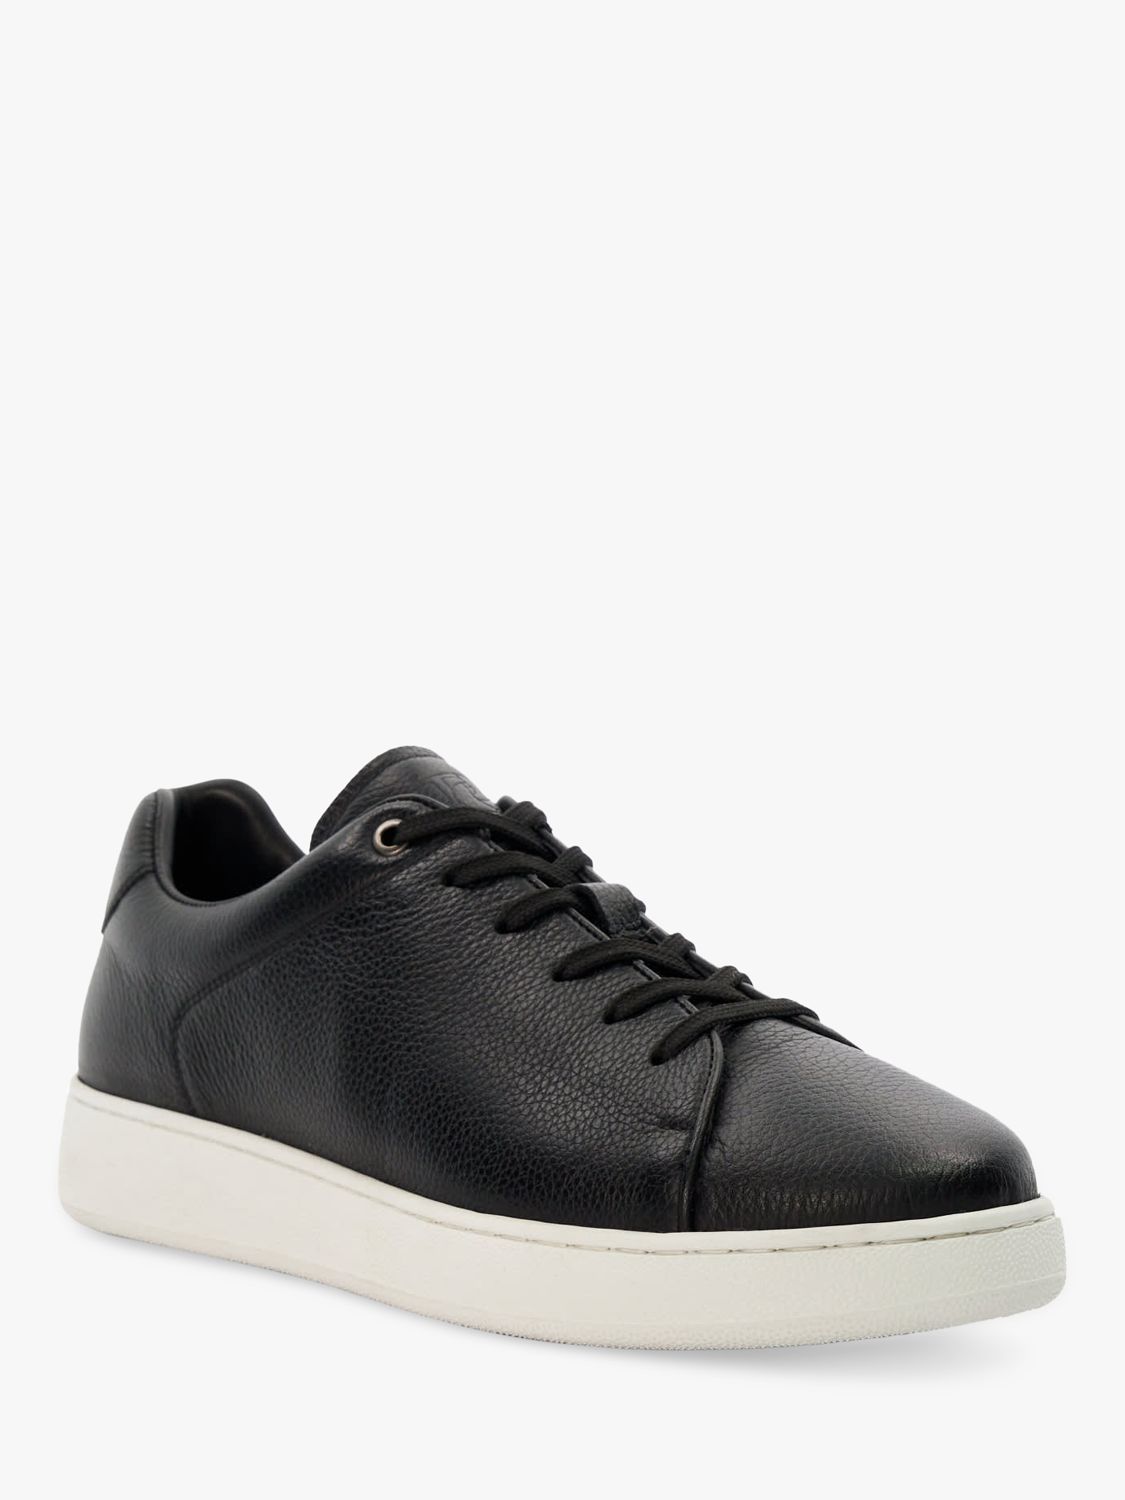 Buy Dune Theons Leather Lightweight Trainers Online at johnlewis.com